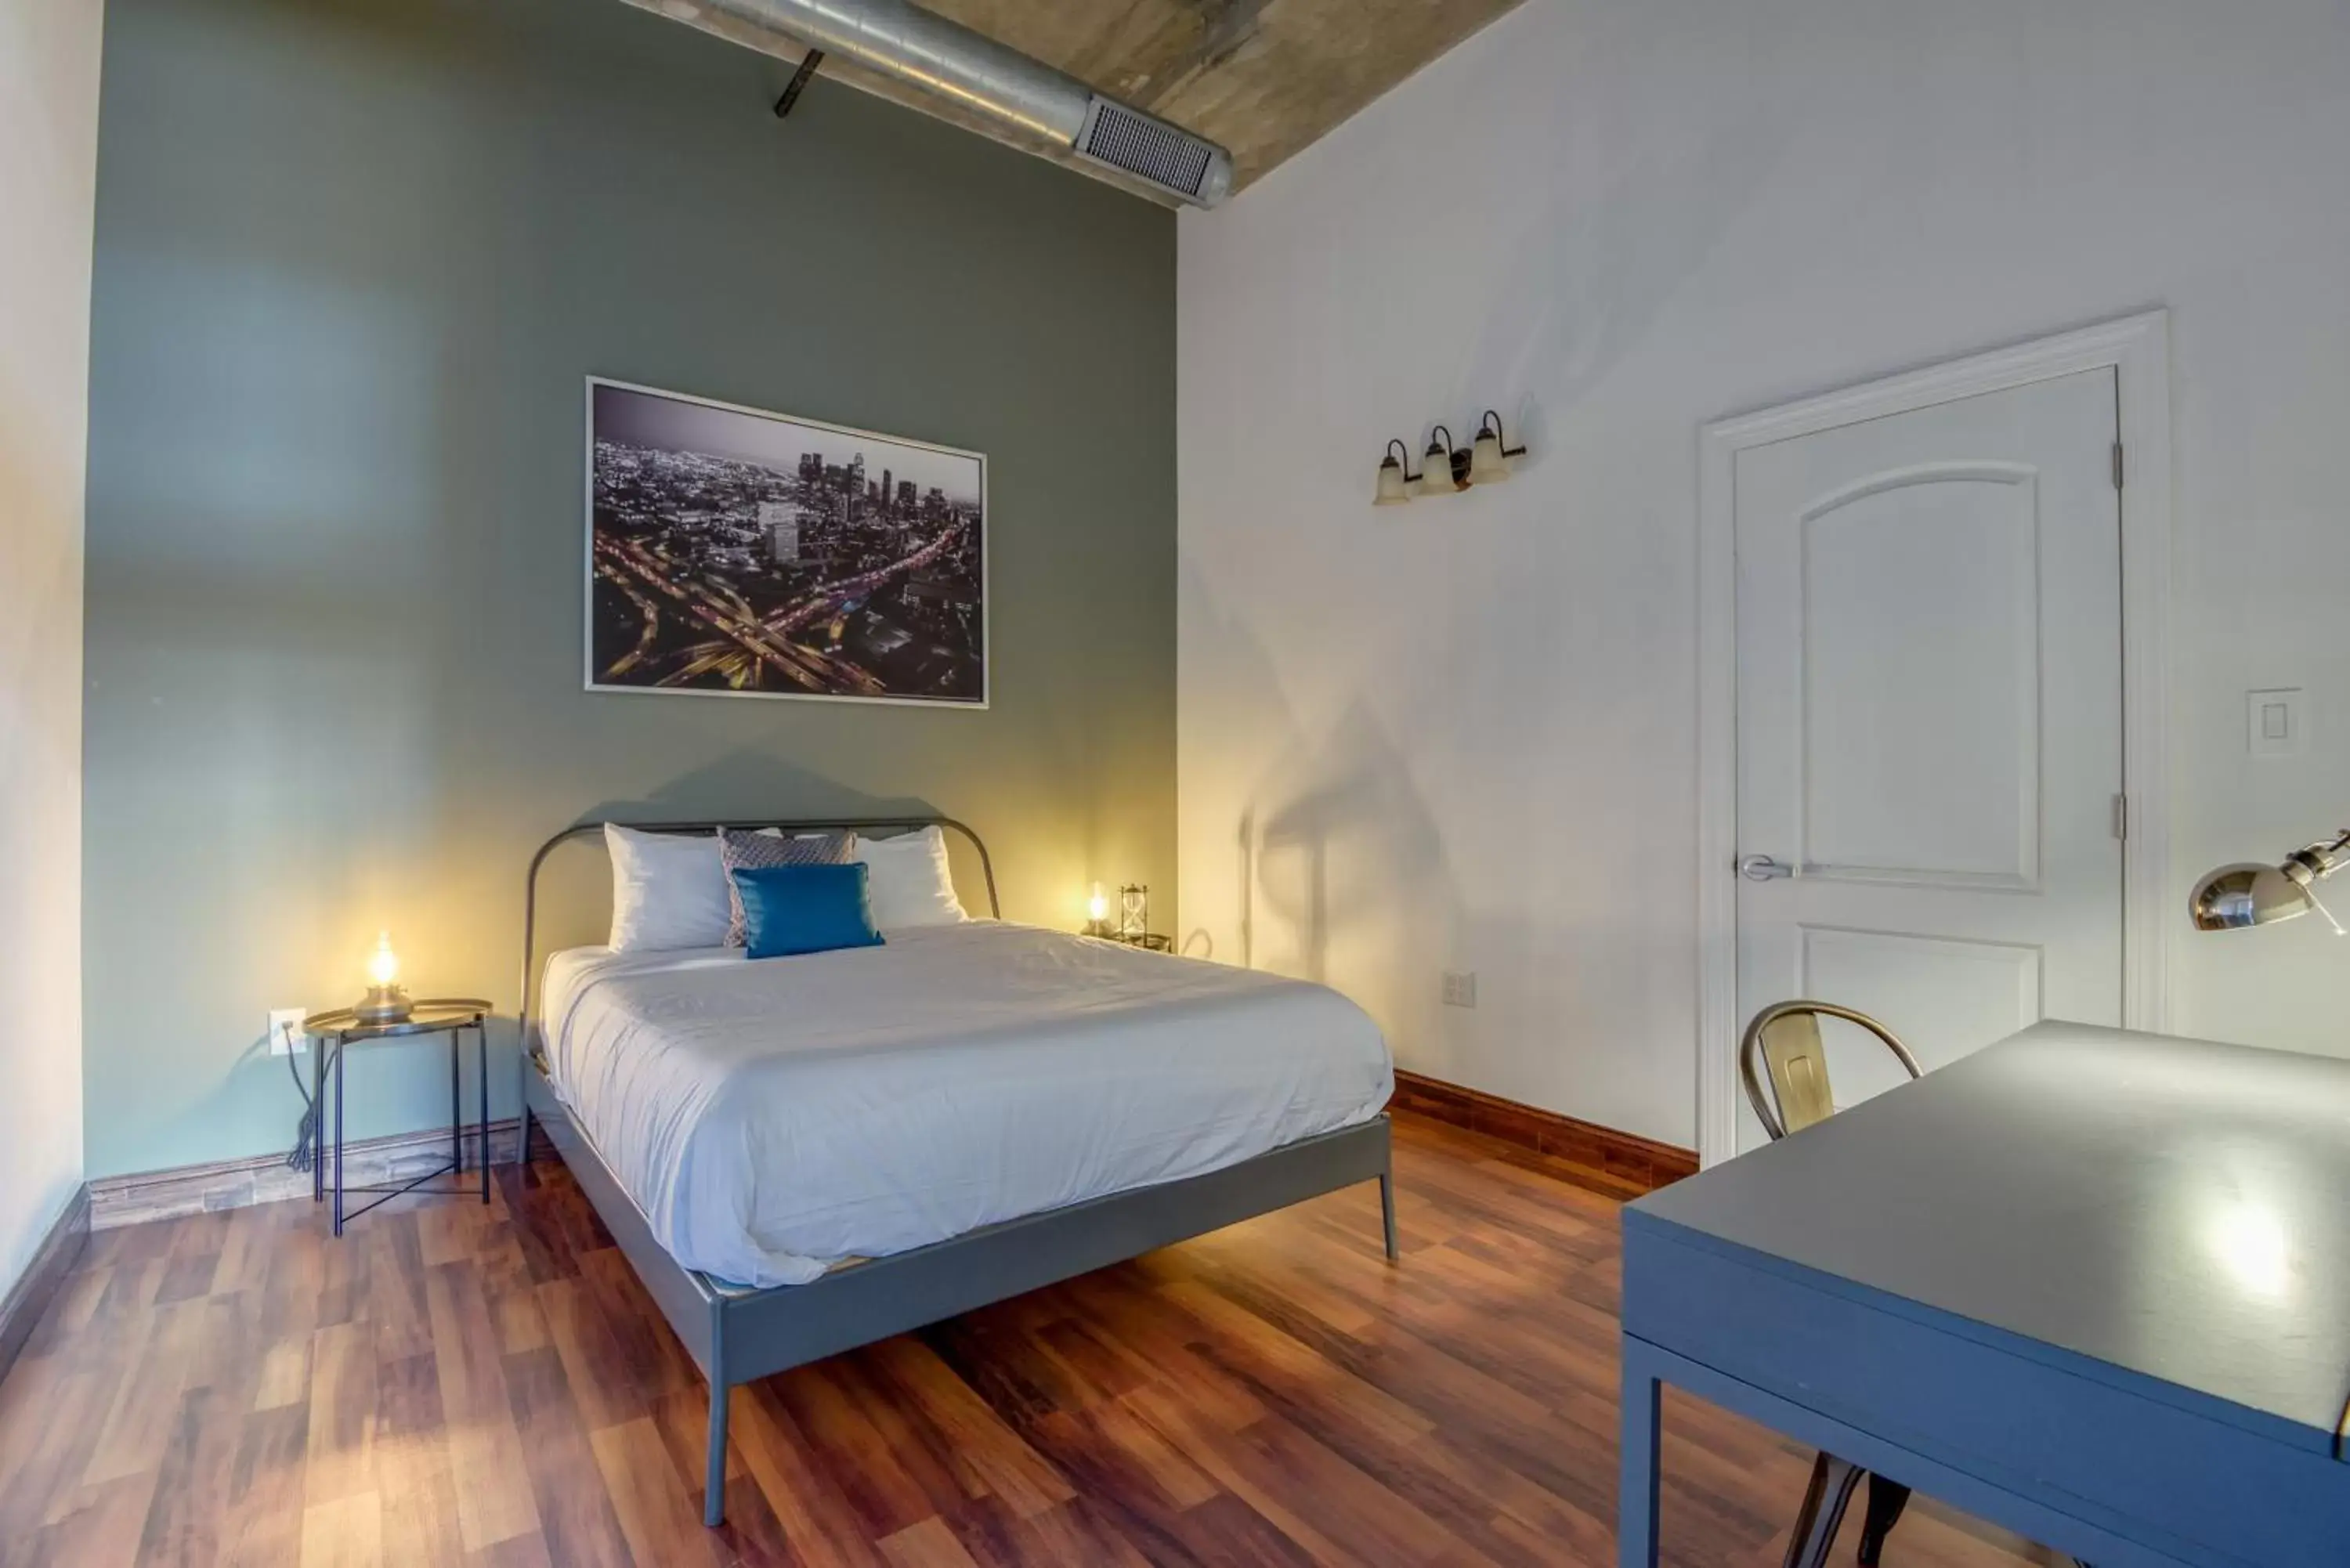 Two-Bedroom Apartment in Sosuite at Independence Lofts - Callowhill